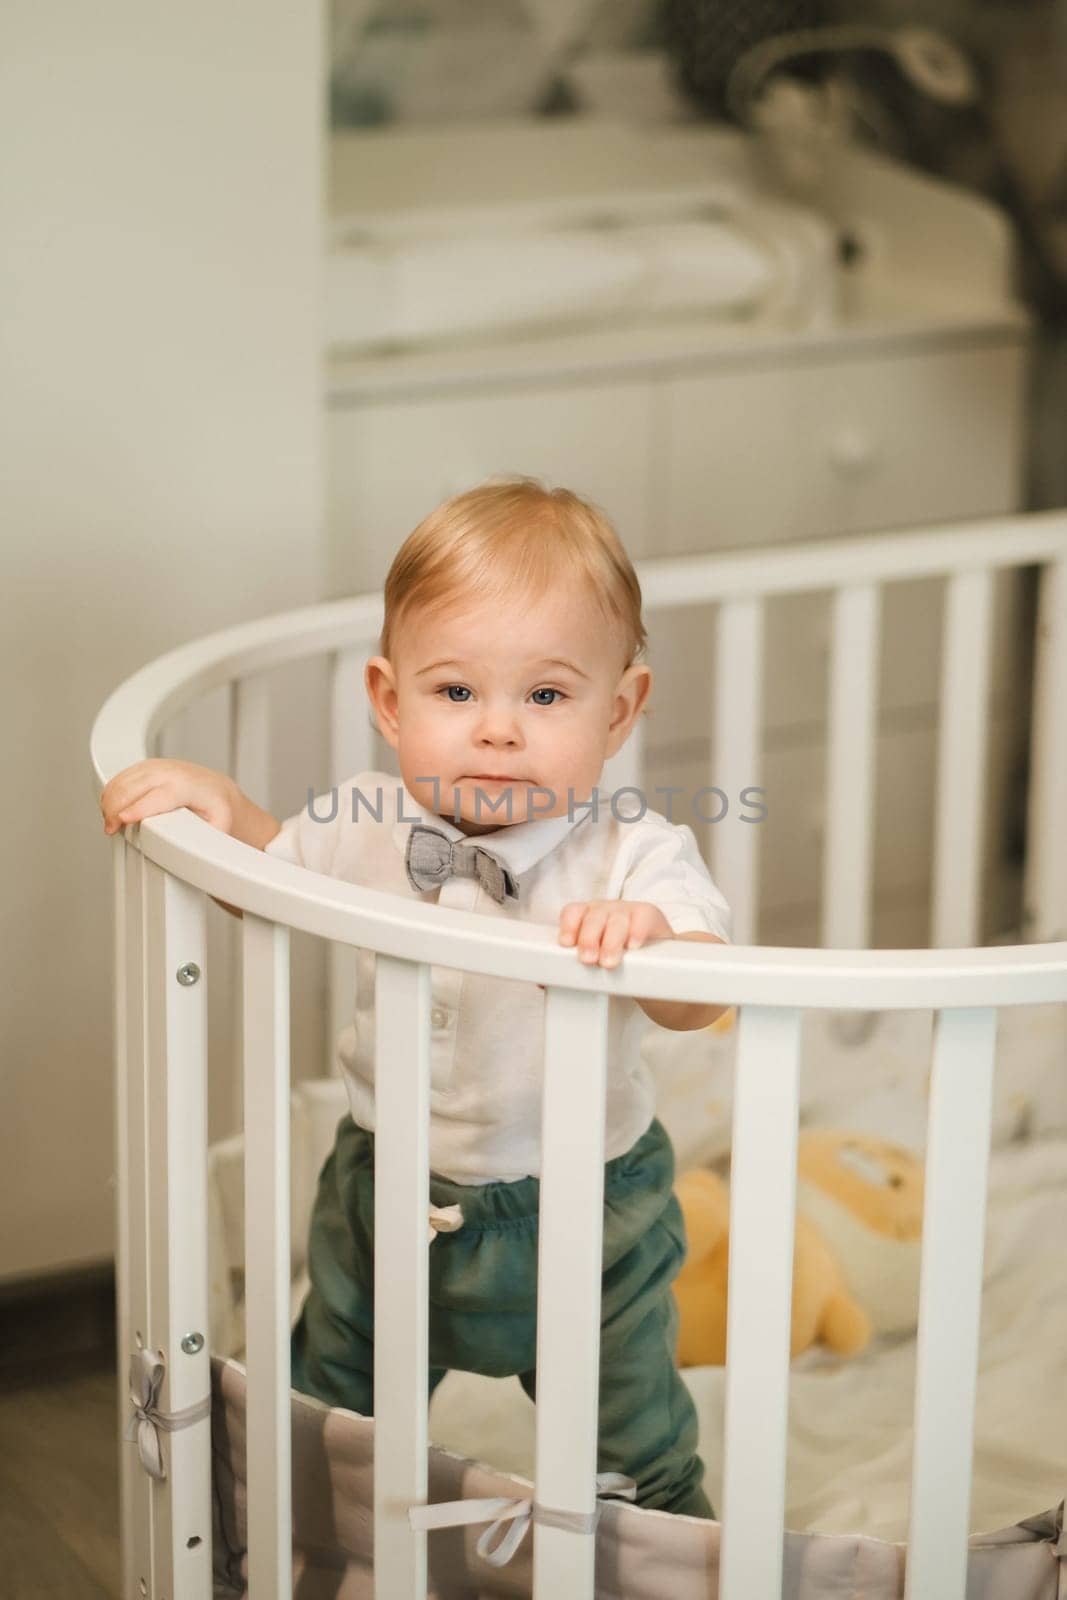 Portrait of a cheerful little boy in a white shirt with a bow tie standing in a crib.